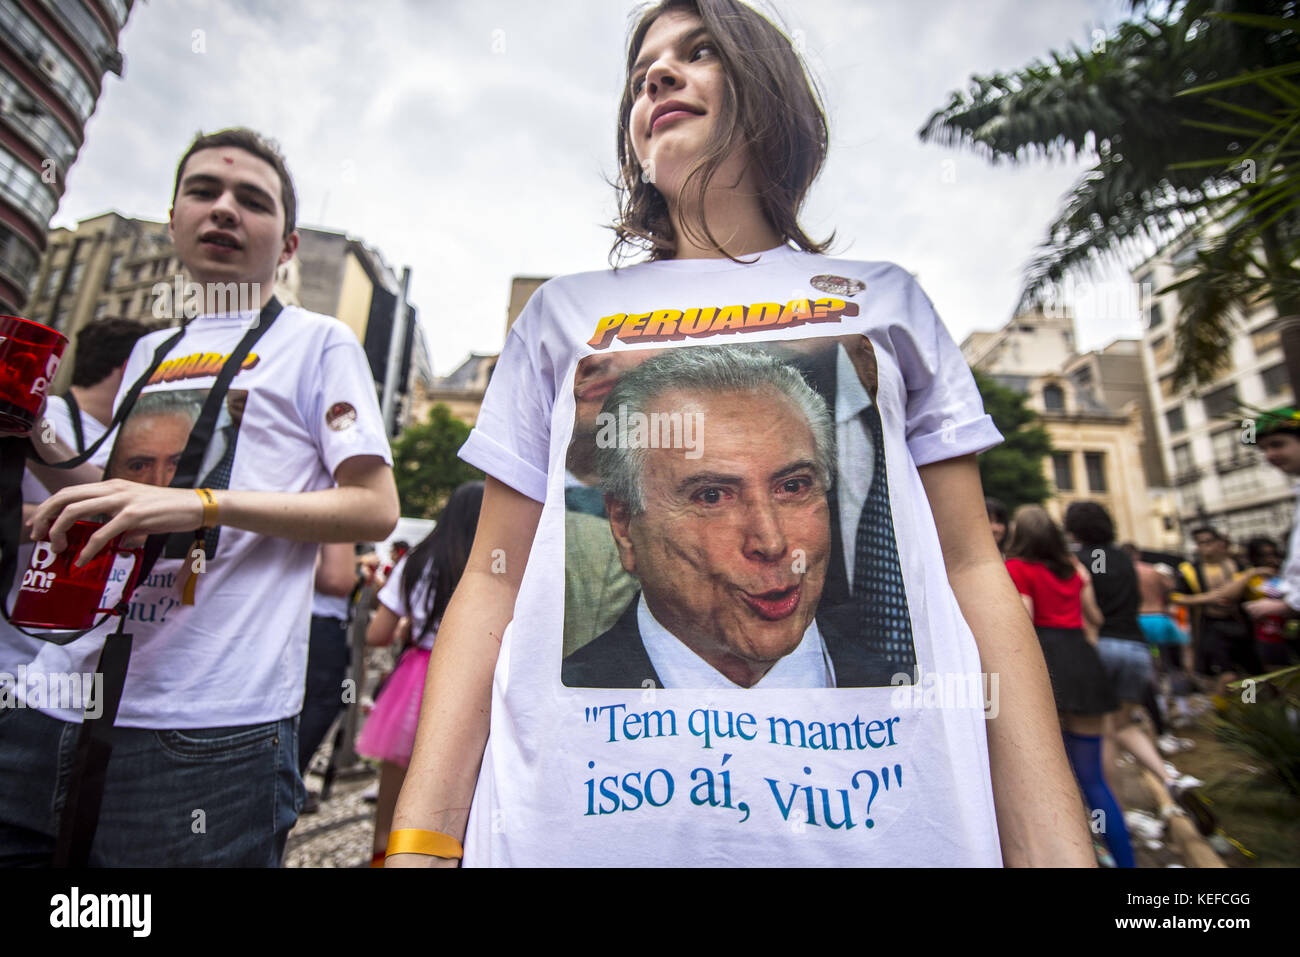 Sao Paulo, Brazil. 21st Oct, 2017. Students from the Law School of USP in Sao Paulo had a big party in the center of Sao Paulo, the traditional 'peruada'. Among the fantasies used by students were references to Mayor Doria, President Michel Temer, President of the United States, Donald Trump, and Federal Police.The party gathered a crowd in the Largo Sao Francisco region. According to the Academic Center XI de Agosto, the party takes place from the mid-1940s in the form of a ''political-ethical-carnival'' Credit: ZUMA Press, Inc./Alamy Live News Stock Photo